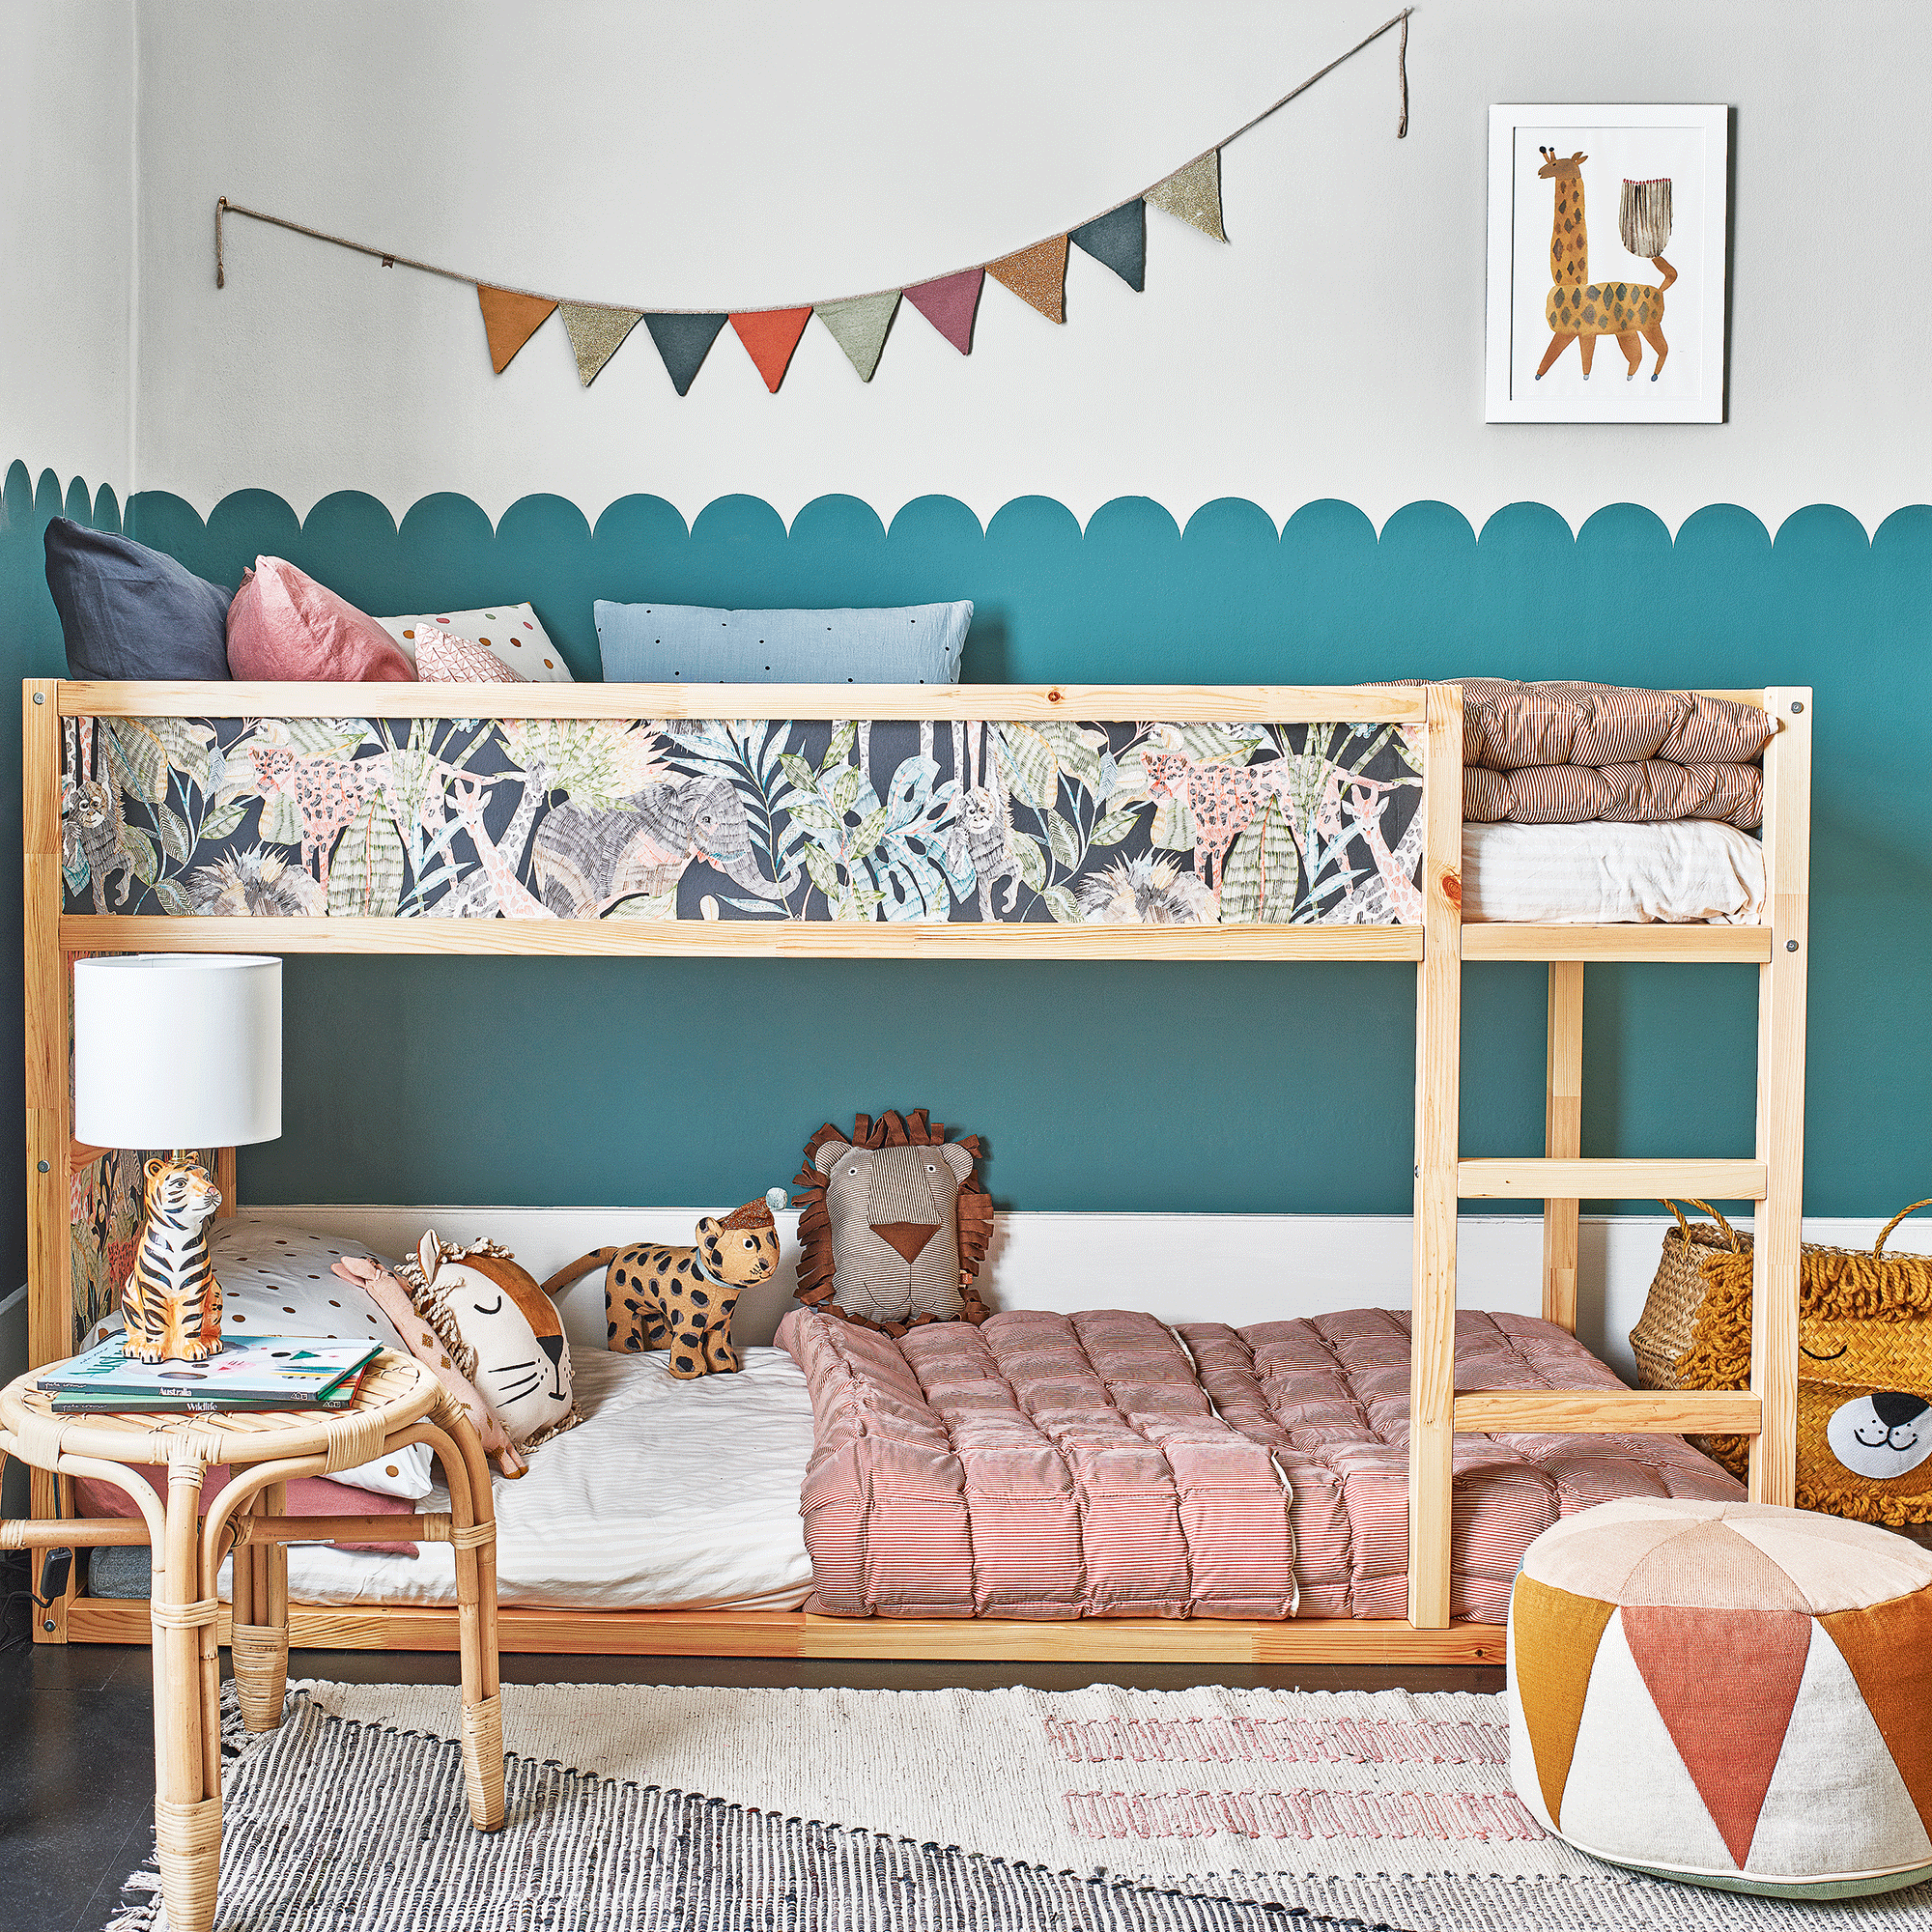 Bunk bed with teal scalloped wall and wooden side table